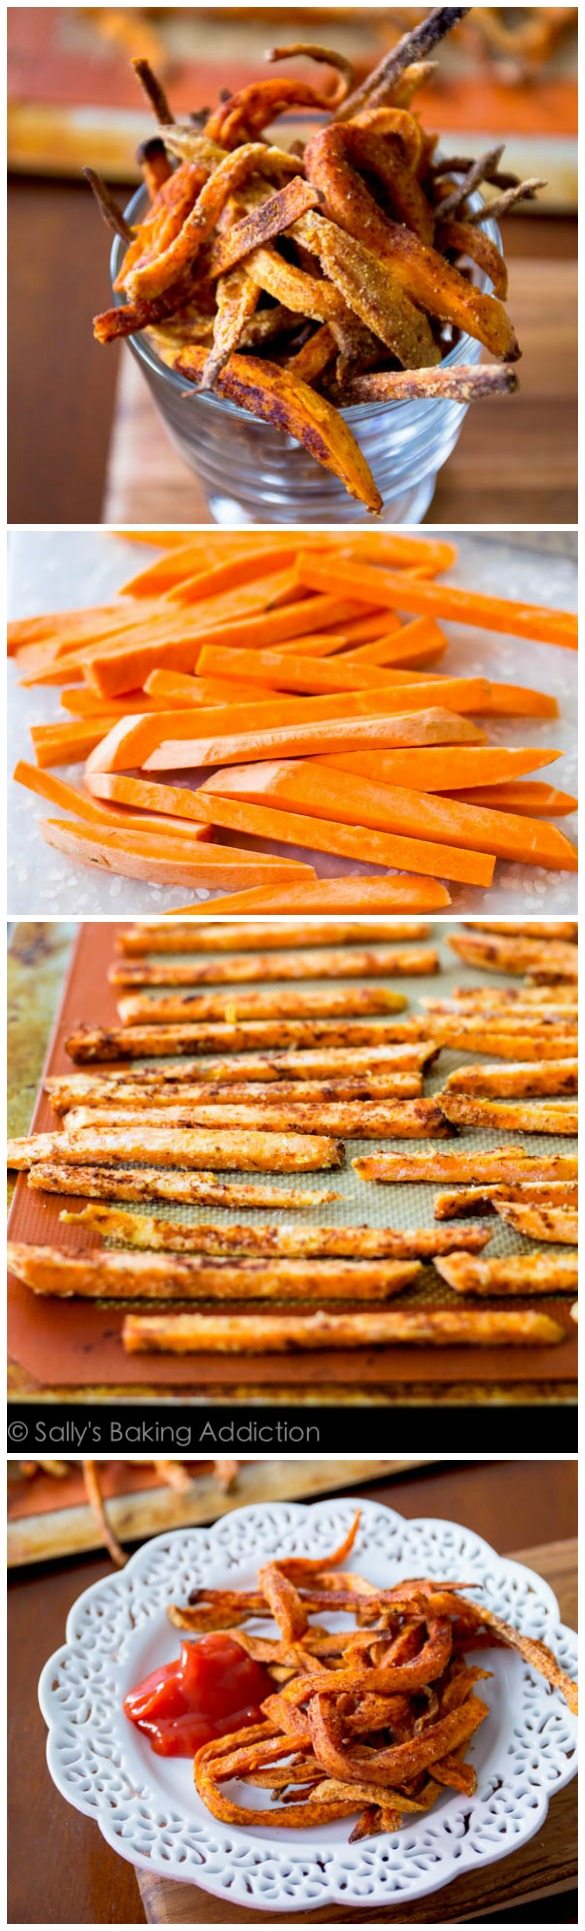 collage of 4 images of sweet potato fries